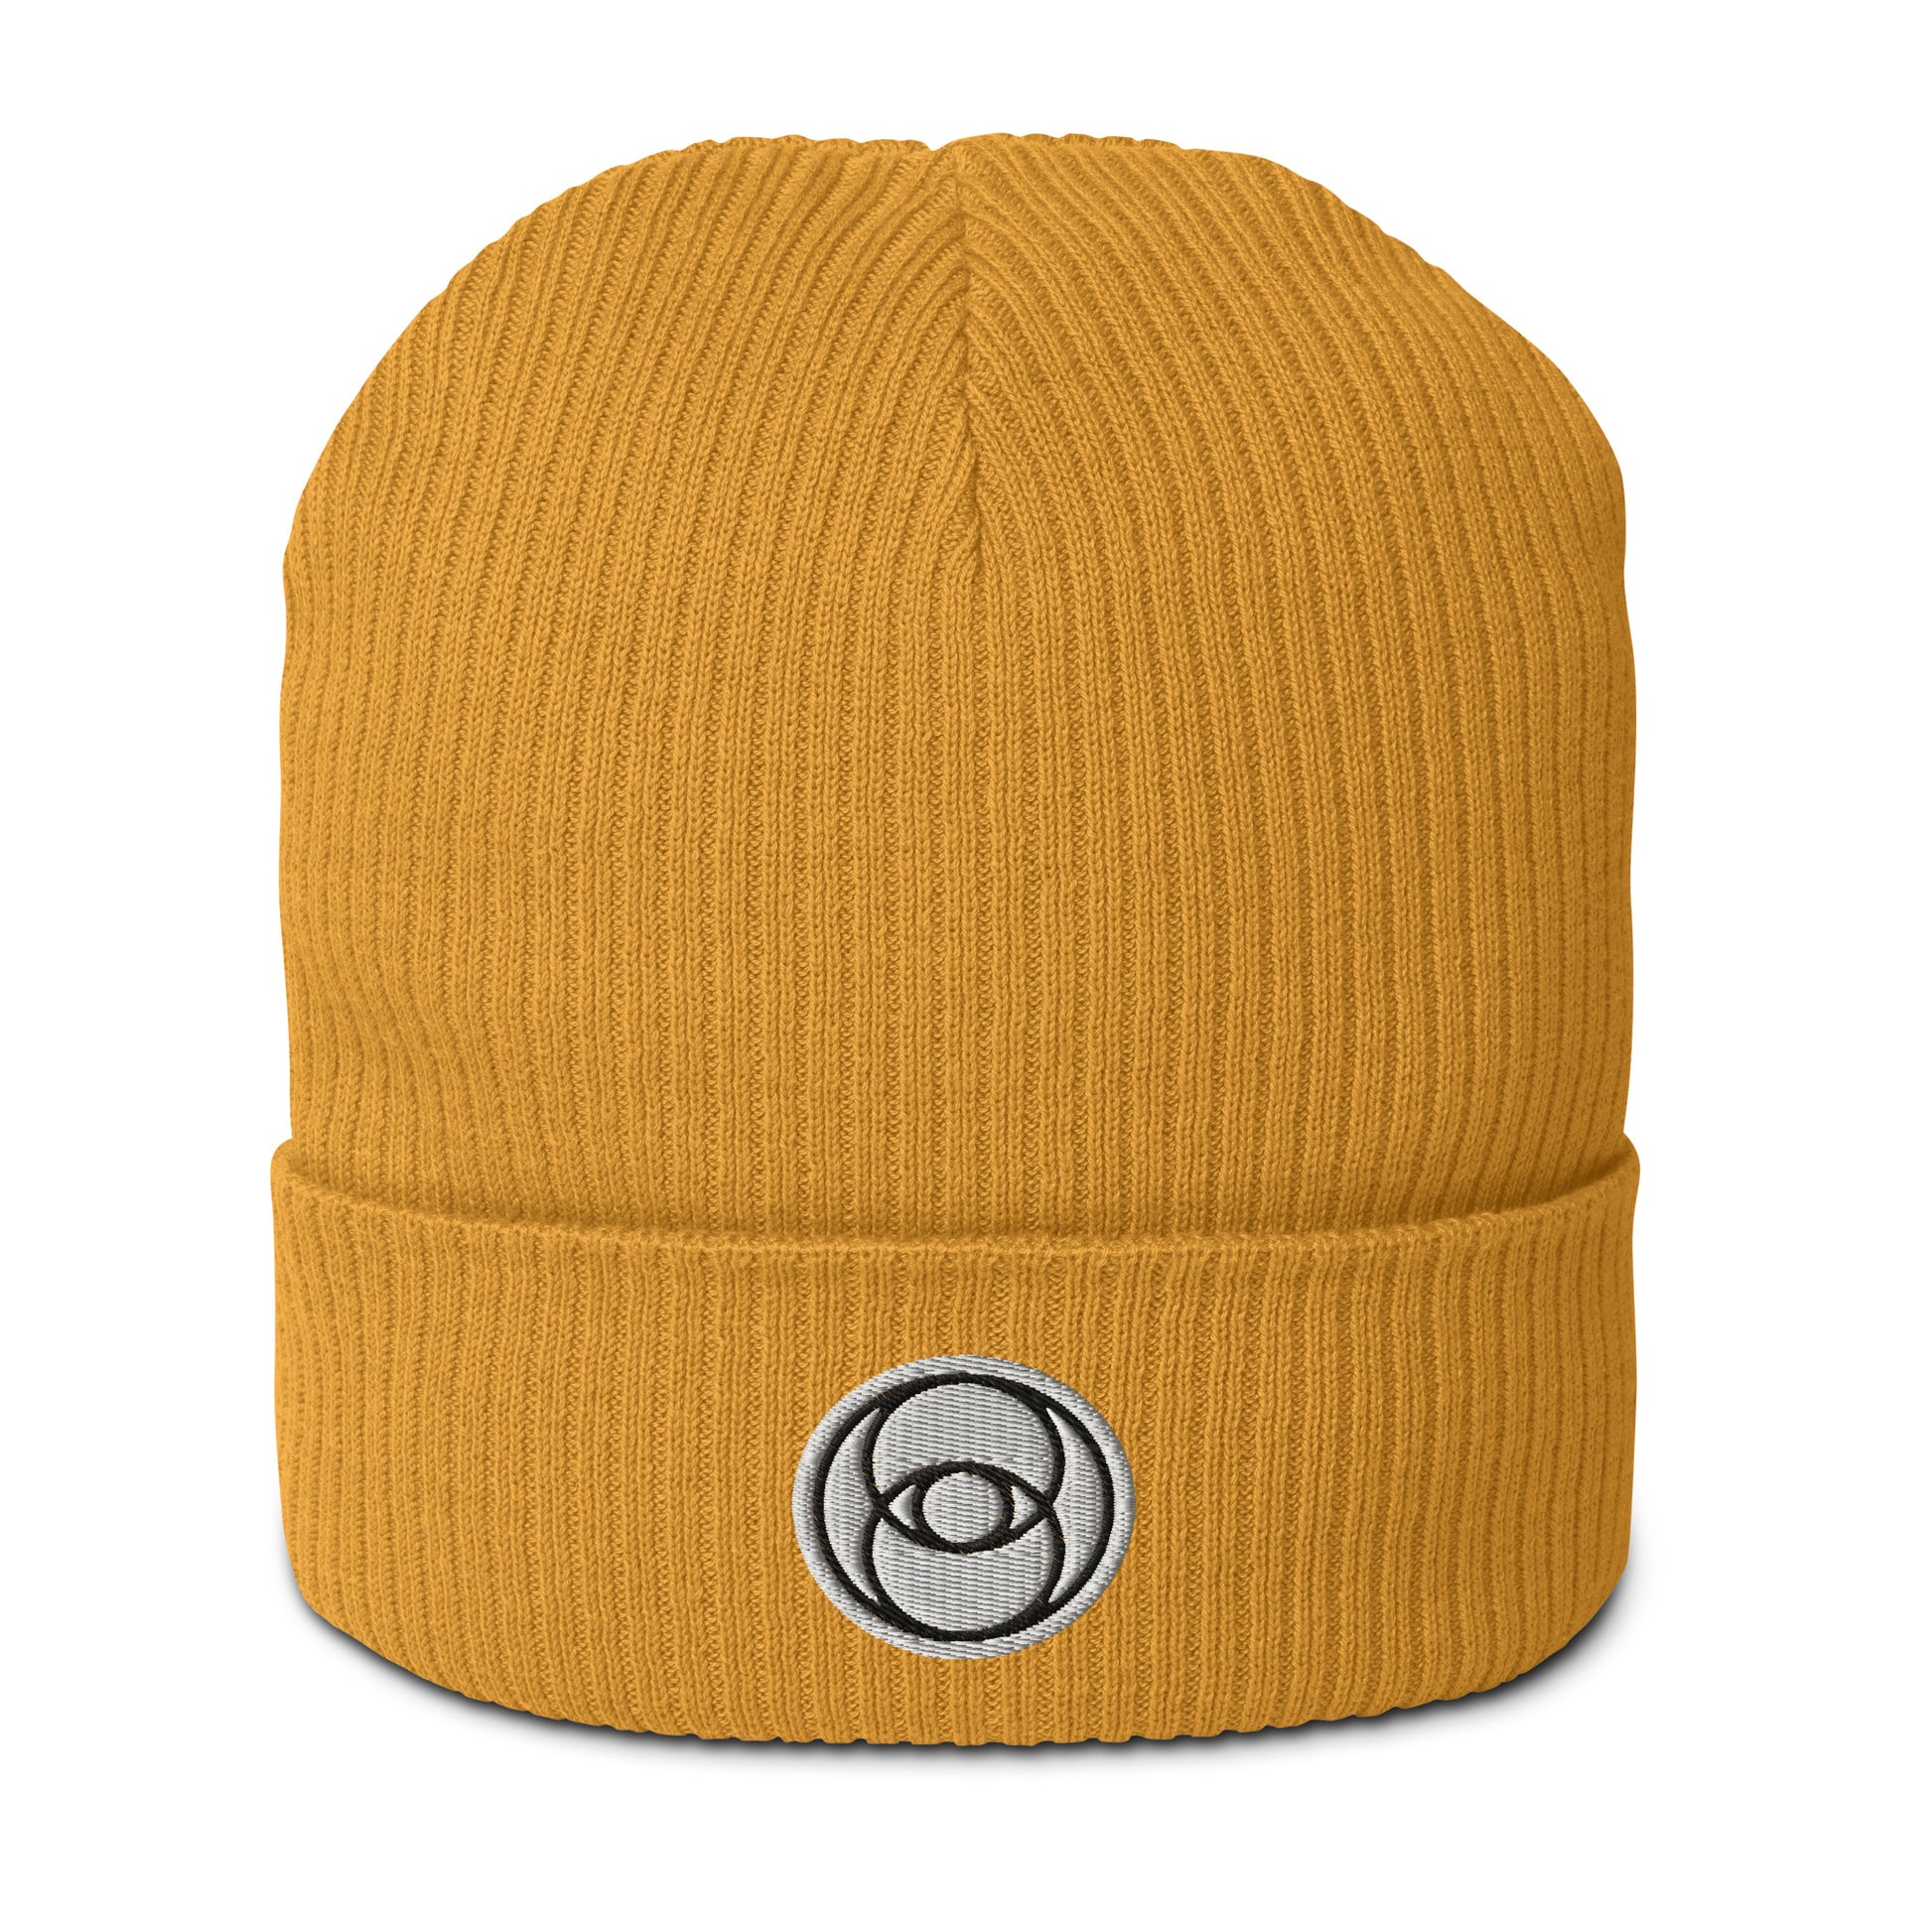 The Vesica Piscis Organic Cotton Beanie in Mustard Yellow is all about harmonious unions. Made of organic cotton and featuring a Vesica Piscis embroidery, this piece is something special. The Vesica Piscis symbolizes unity, balance, and connecting with the universe. Our beanies are made with breathable, lightweight fabric and natural materials, so you can stay comfy while you're exploring the mysteries of existence. Grab one of these beanies and add a touch of divinity to your style.